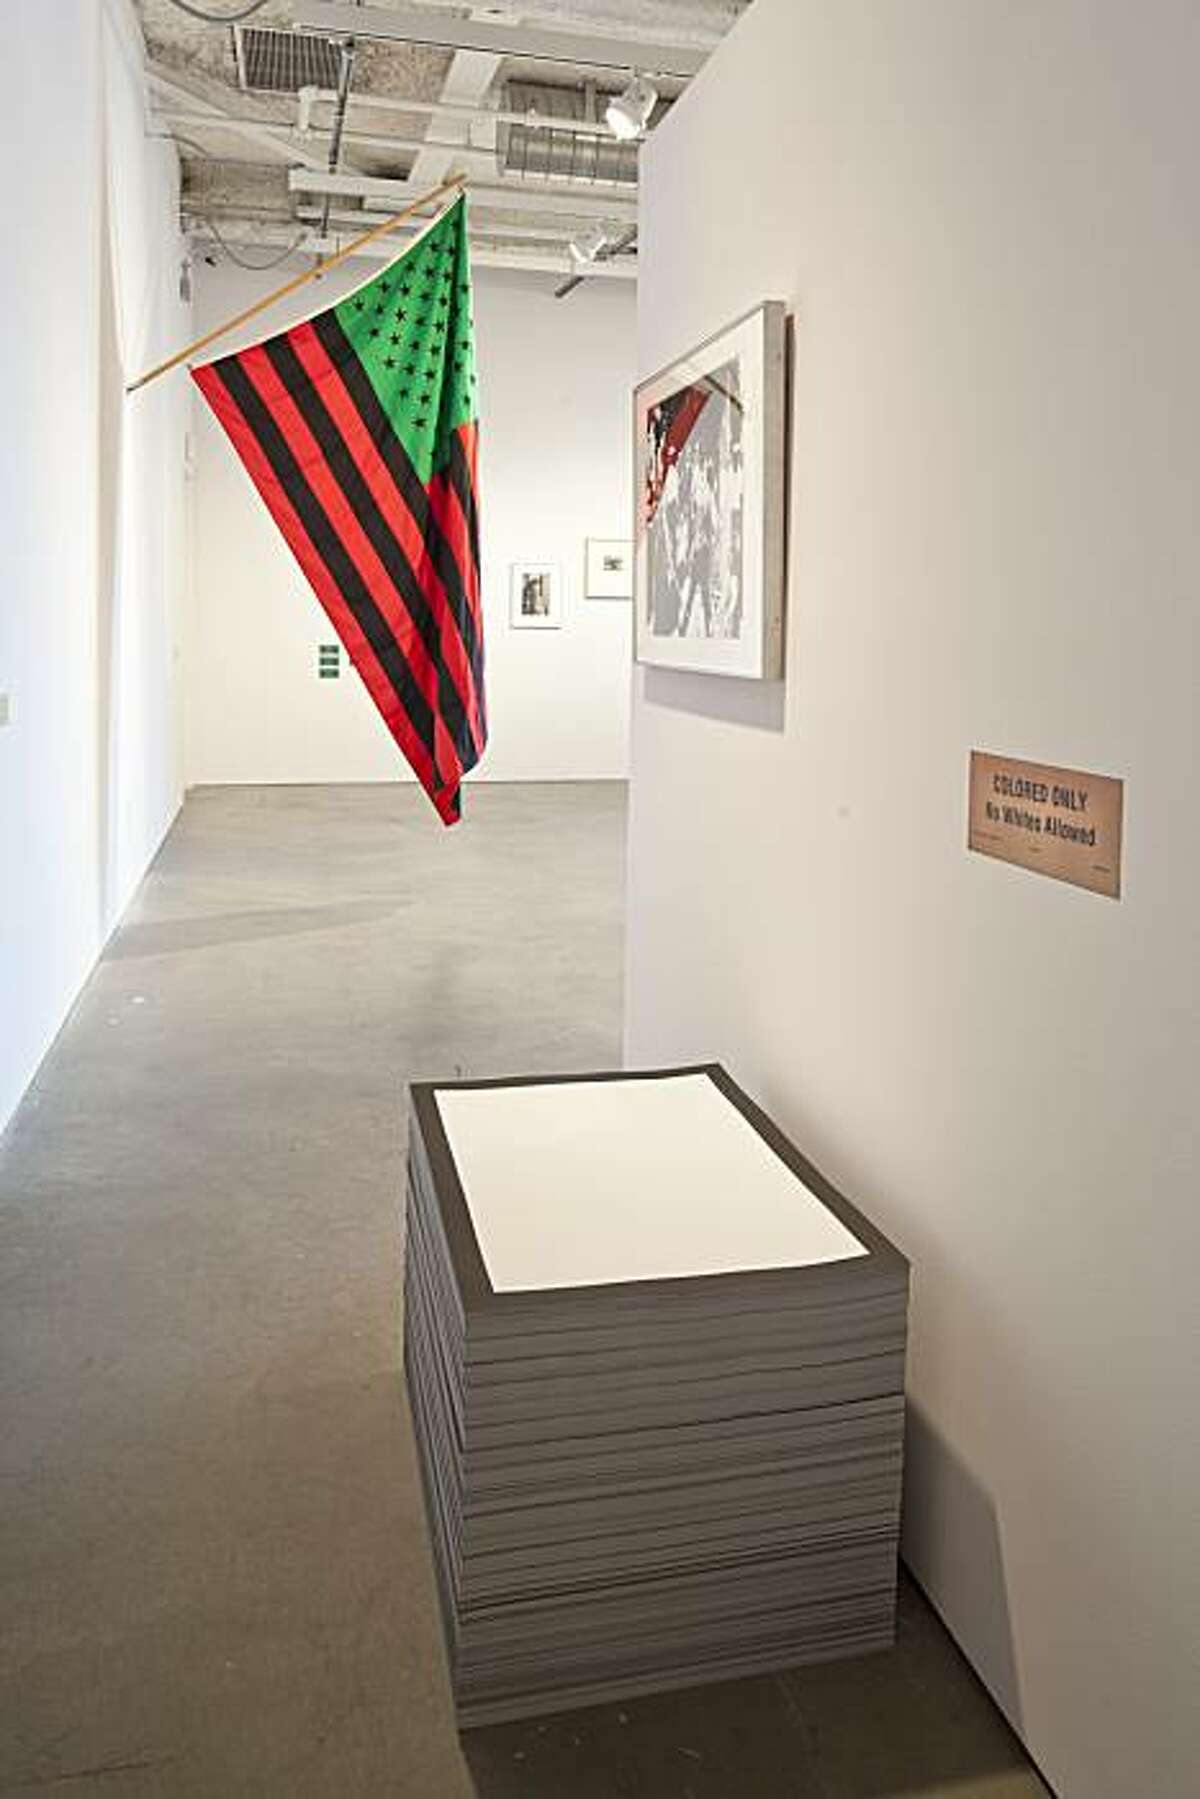 INstallation view of "Huckleberry Finn" exhibition at CCA showing "Untitled (The End)" (1990) lithograph in unlimited edition by Felix Gonzalez-Torres, "Birmingham Race Riot" (1964) screenprint by Andy Warhol and "African-American Flag" (1990) dyed fabric by David Hammons.